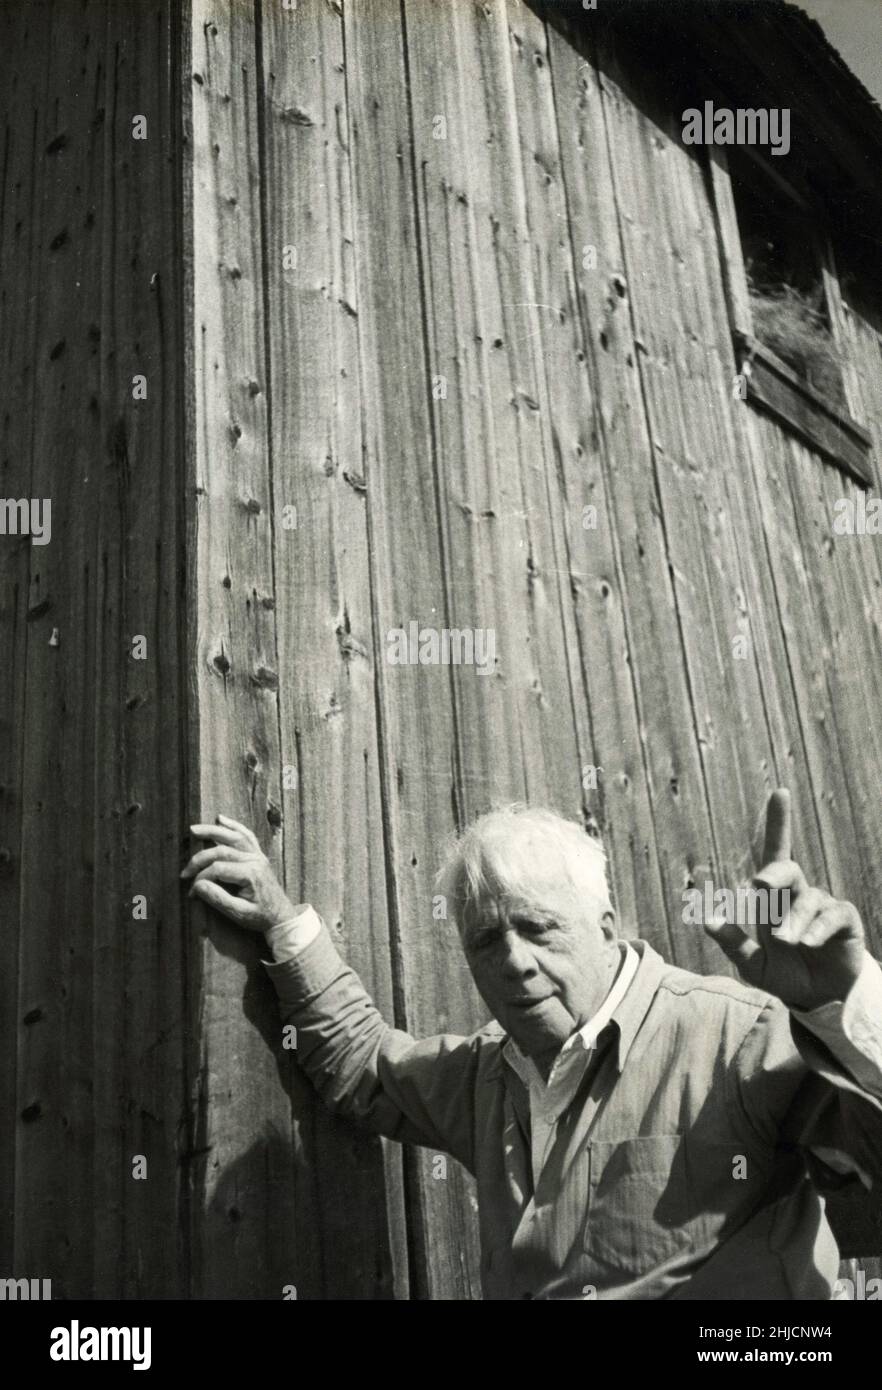 New England poet Robert Frost (1874 - 1963) standing by a barn on his farm near Ripton, Vermont. Famous for poems such as 'Stopping by Woods on a Snowy Evening' and 'The Road Not Taken,' Frost won four Pulitzer Prizes during his life. Stock Photo